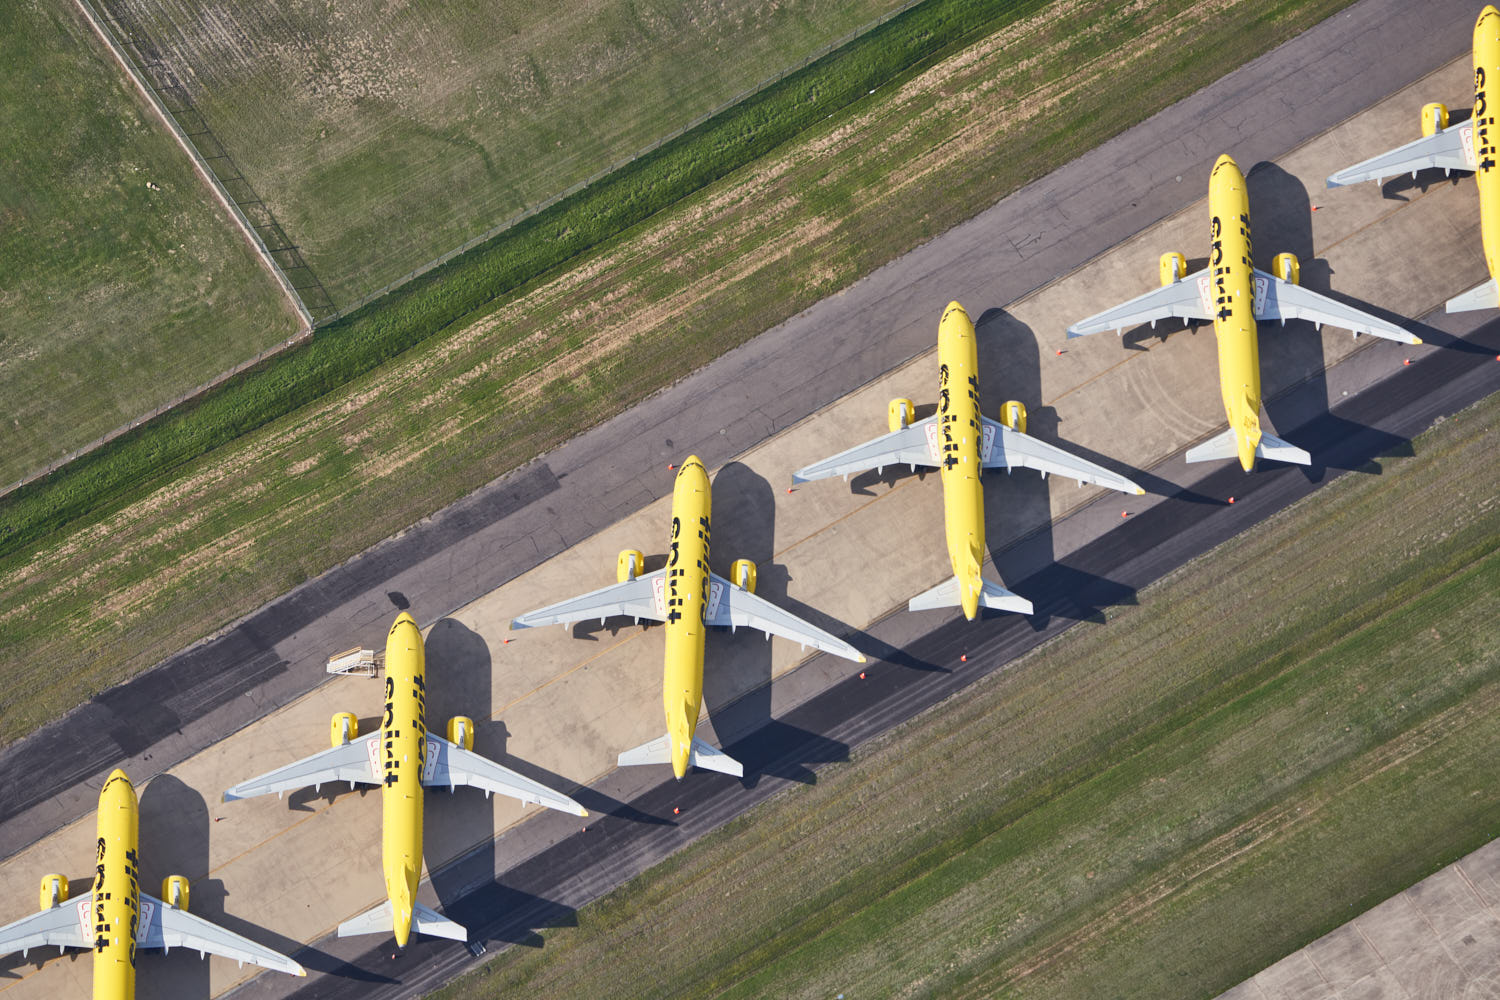 a group of yellow airplanes on a runway